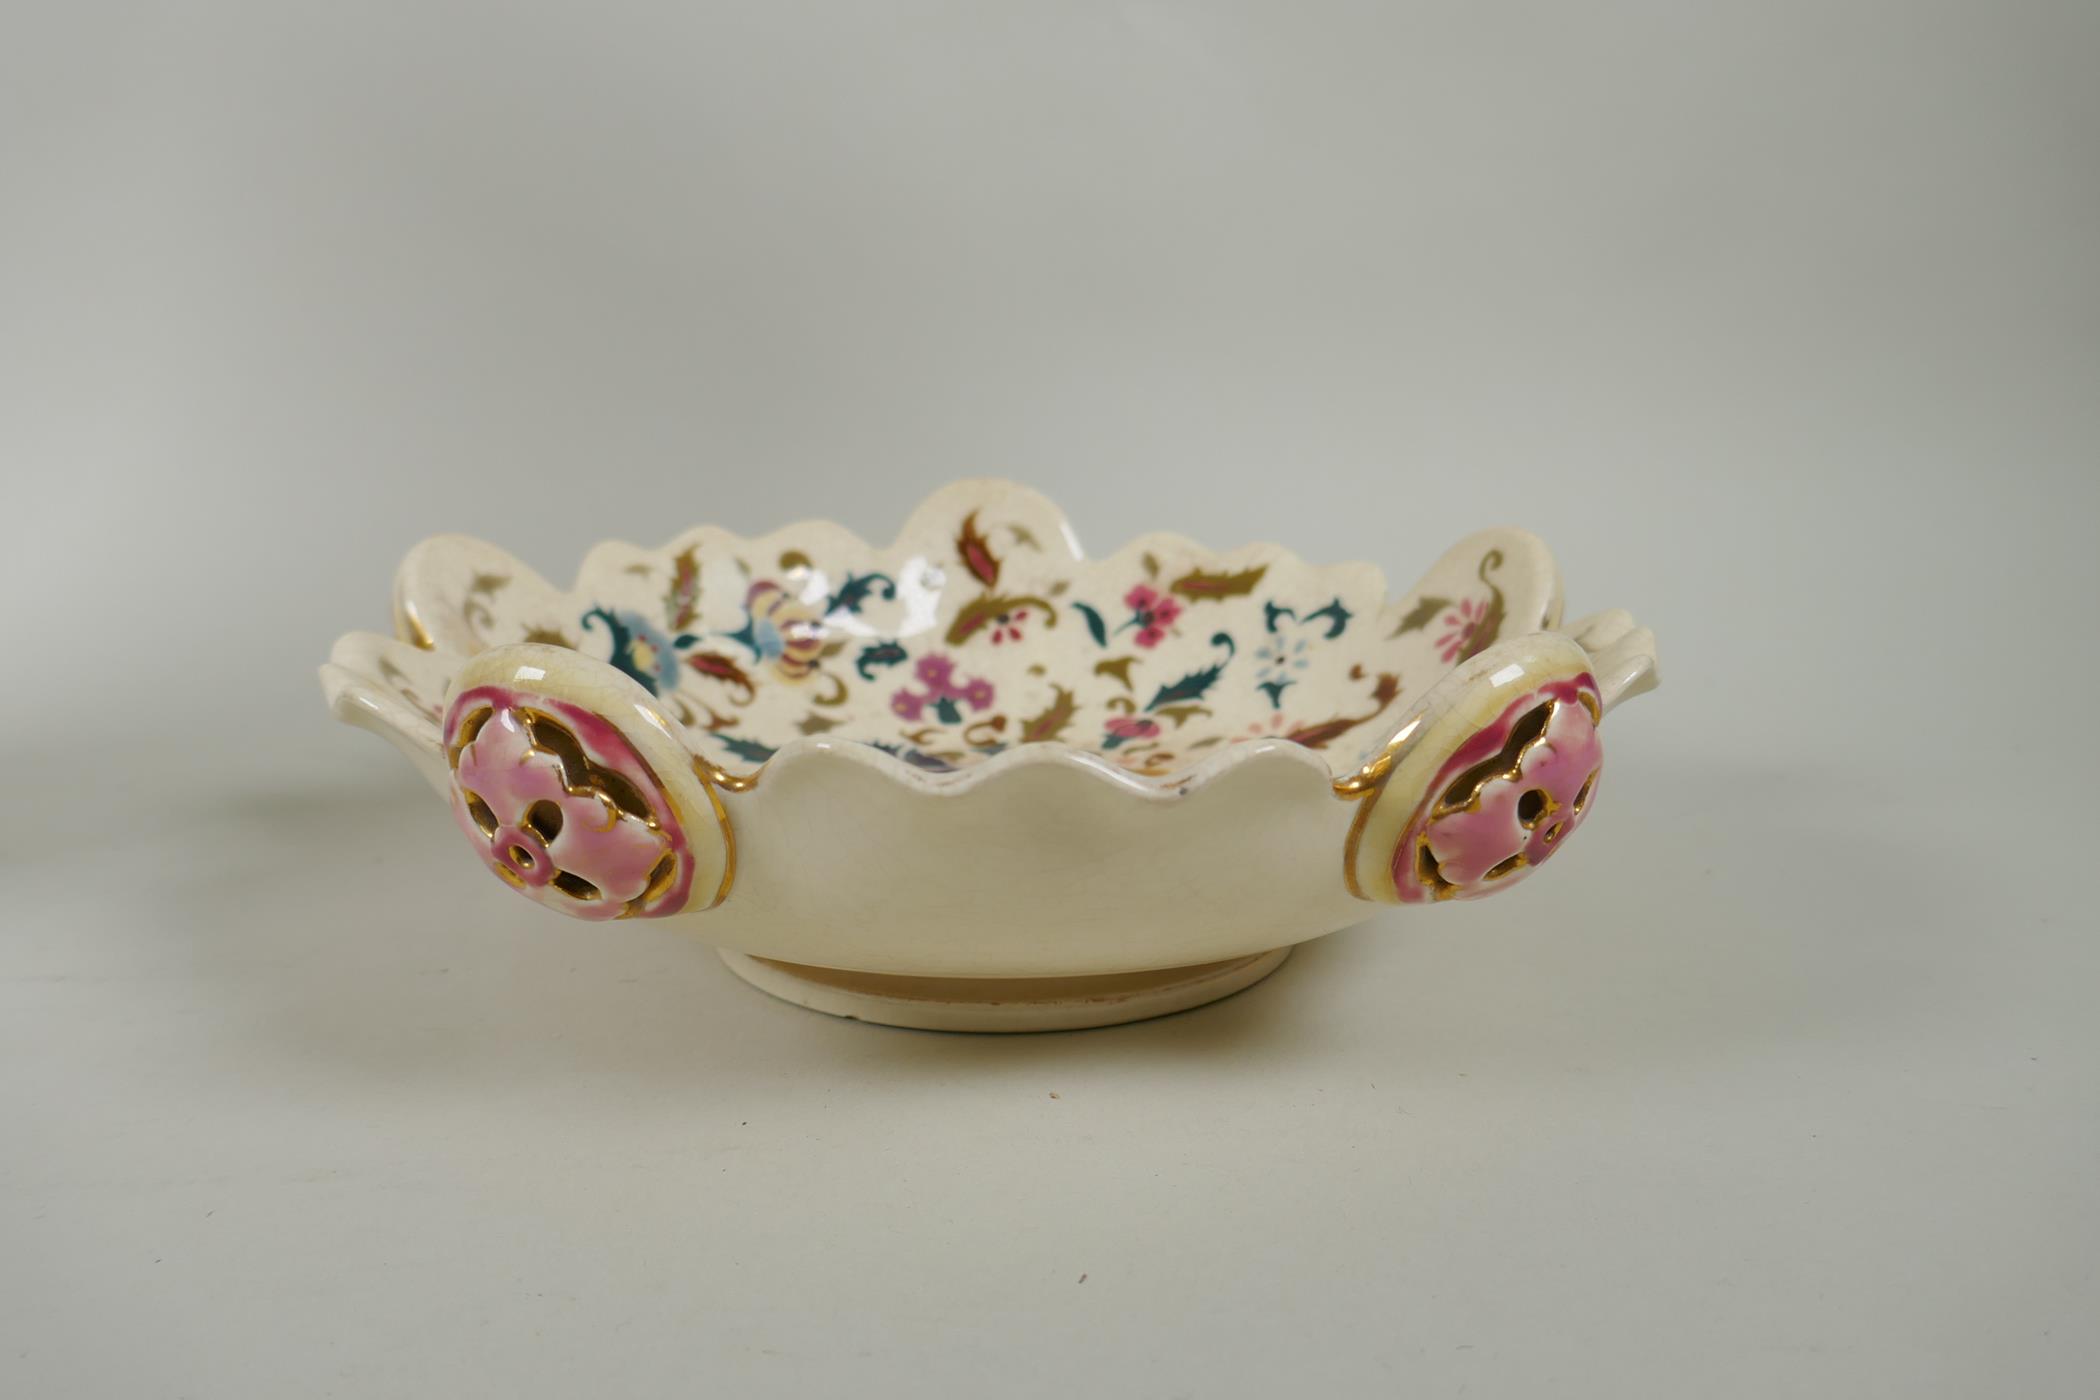 A Zsolnay Pecs polychrome porcelain dish with frilled rim and floral decoration, together with a - Image 3 of 7